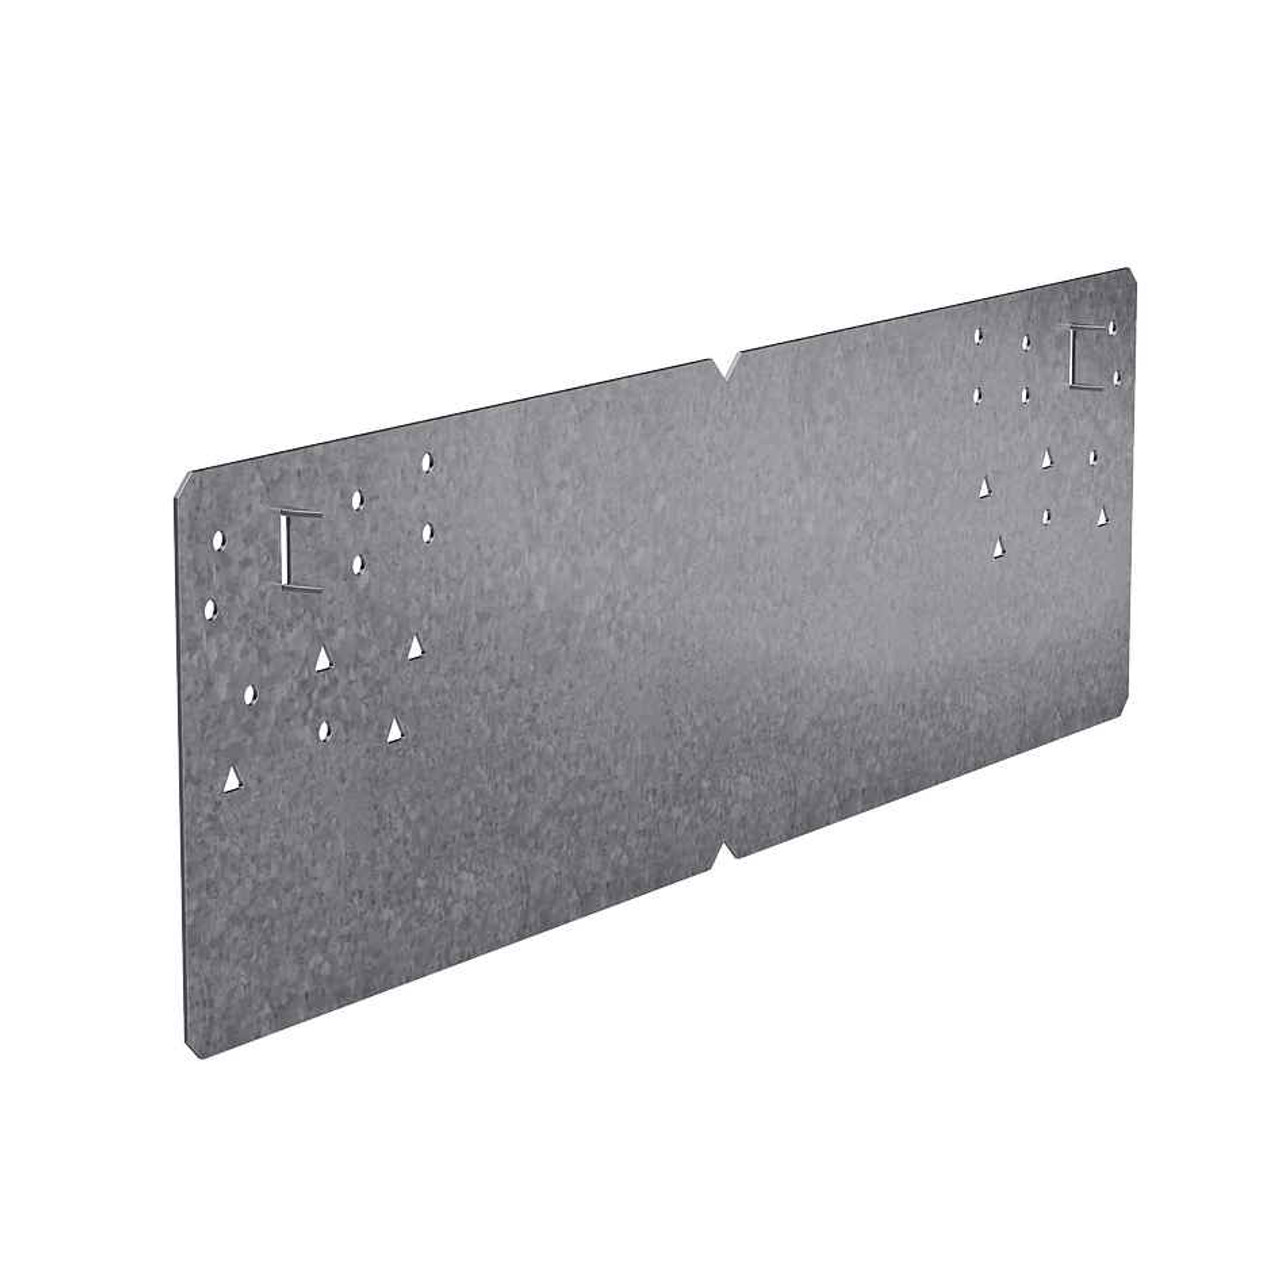 Simpson Strong-Tie PSPN516Z 5 x 16-5/16-Inch Protecting Shield Plate ZMAX 20 Pk